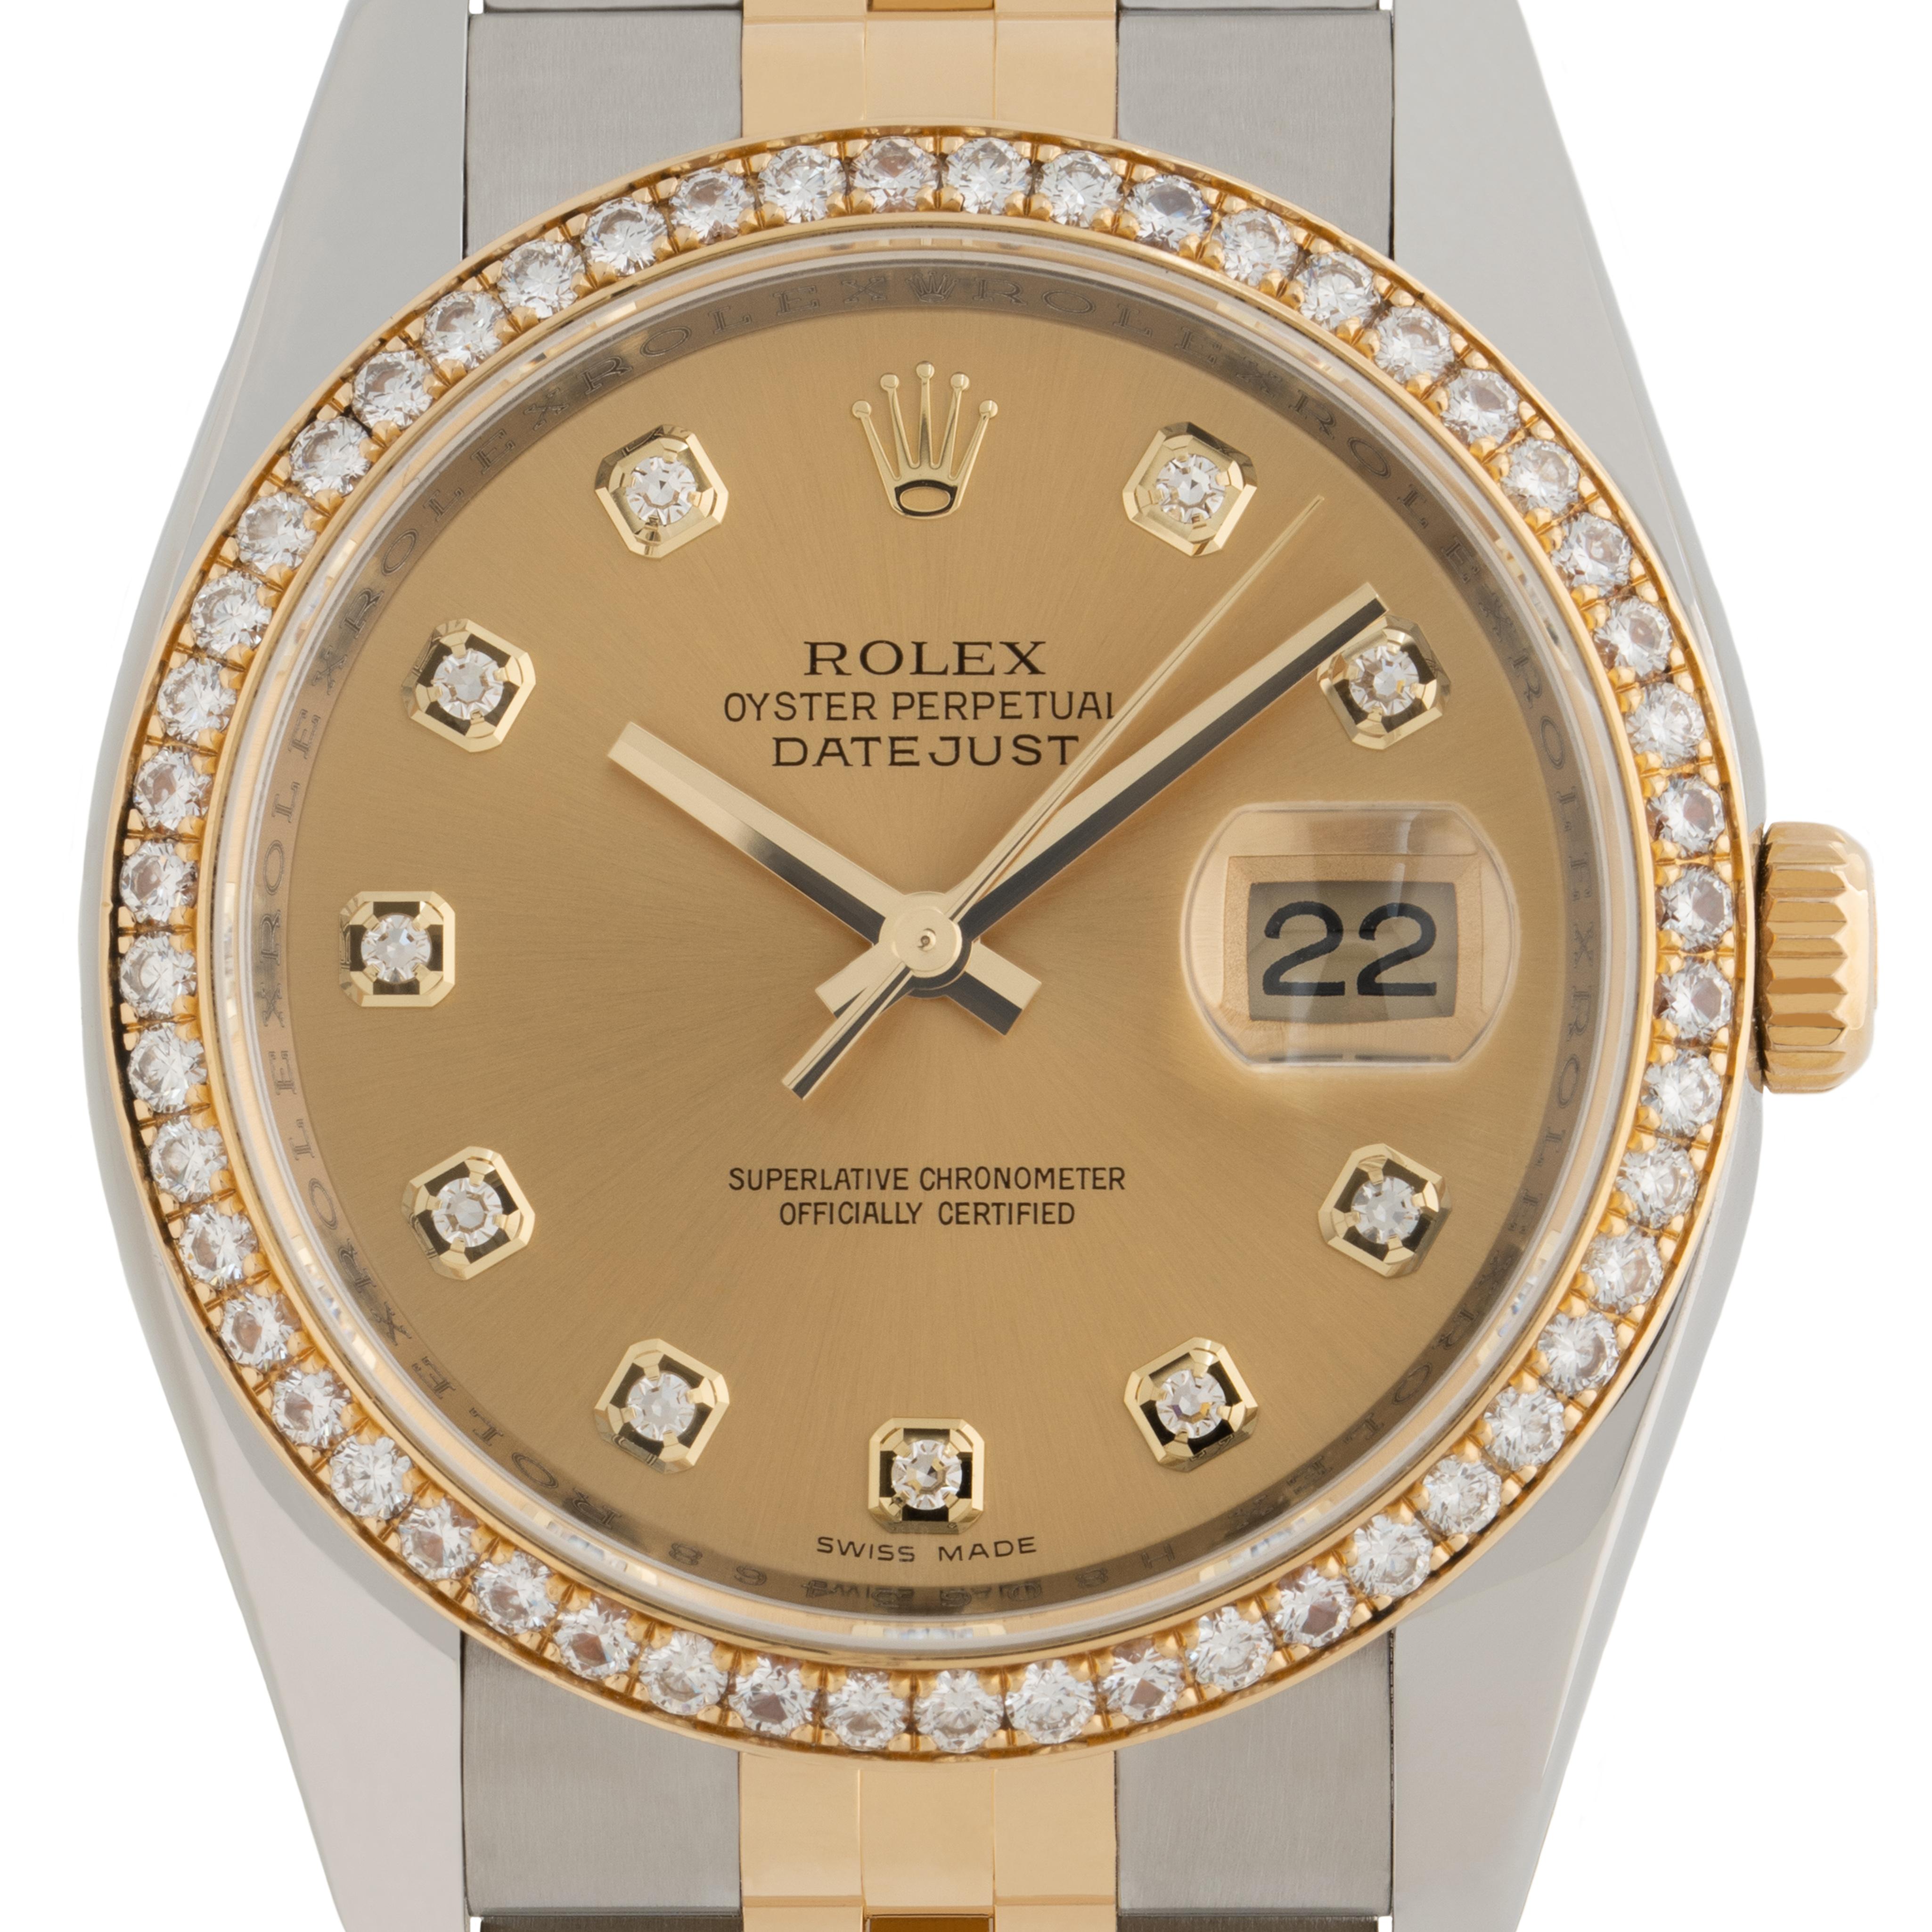 2014 Rolex DateJust Stainless Steel and 18 Karat Gold and Original Diamond Dial Model 116243 
c.2014

Includes original Rolex card.
Diamond Dial and Markers are all original Rolex
36mm Case

Stephanie Windsor guarantees the proper functioning of